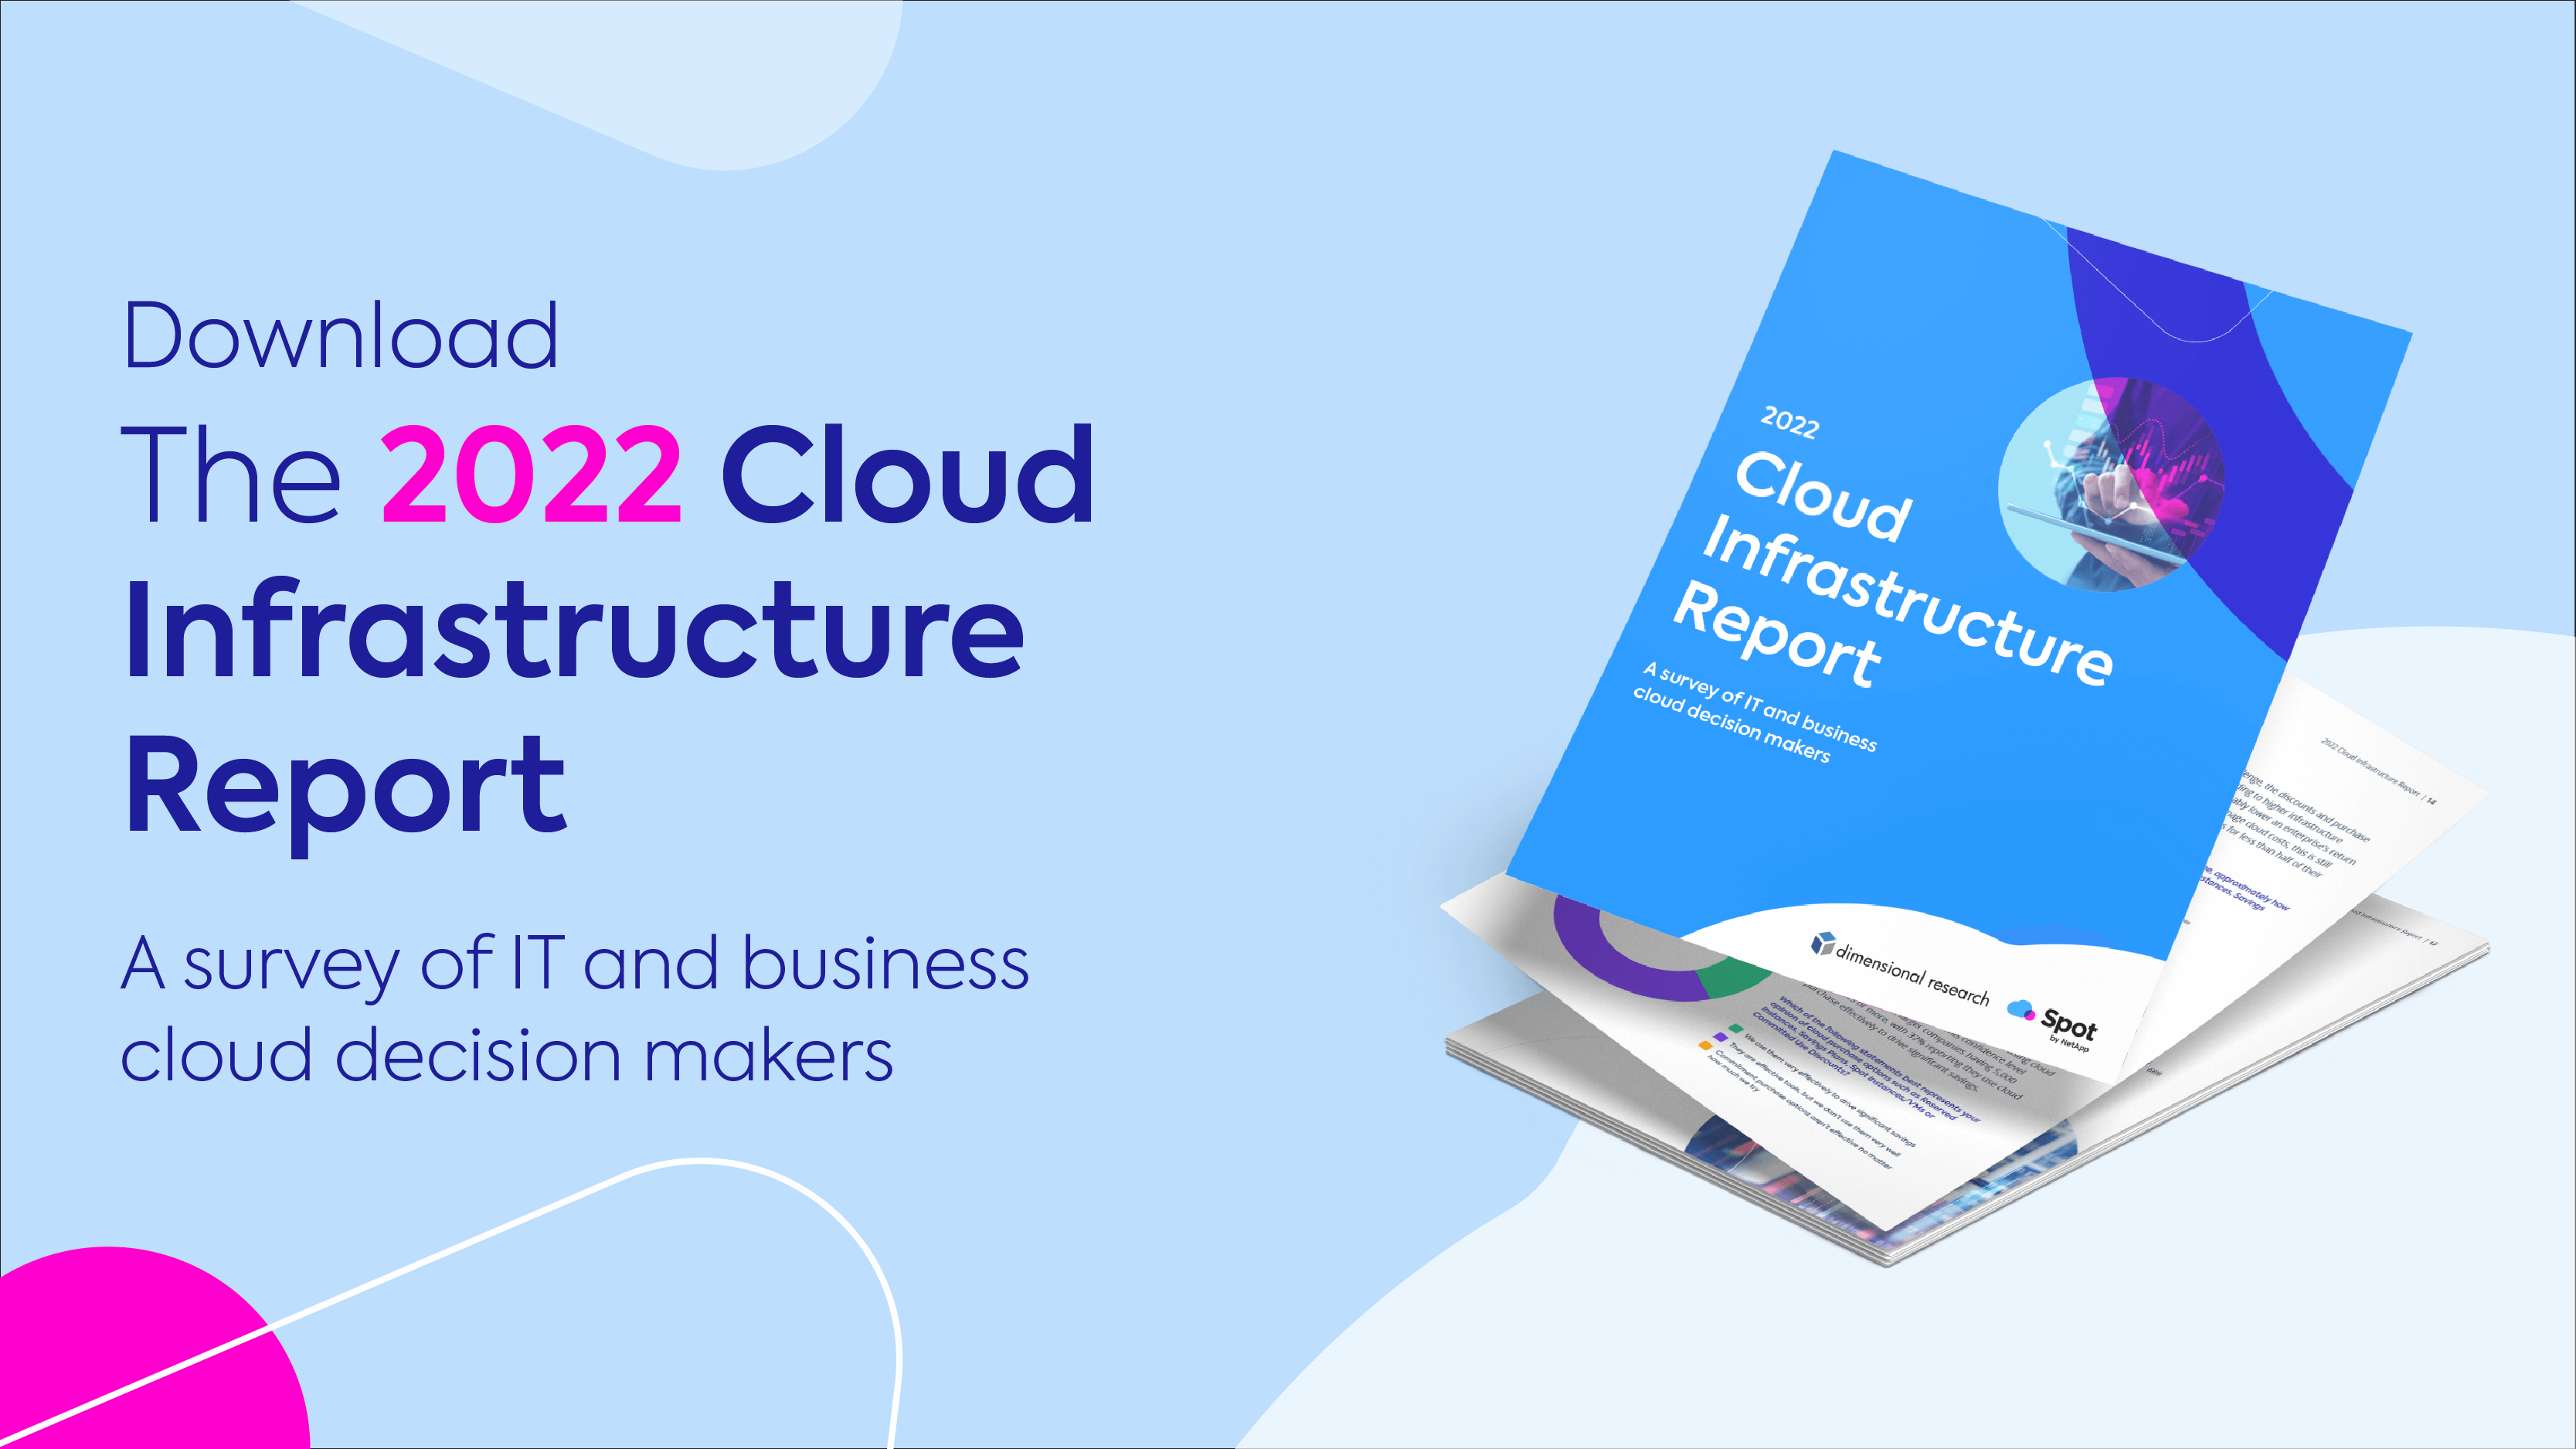 Download the 2022 Cloud Infrastructure Report